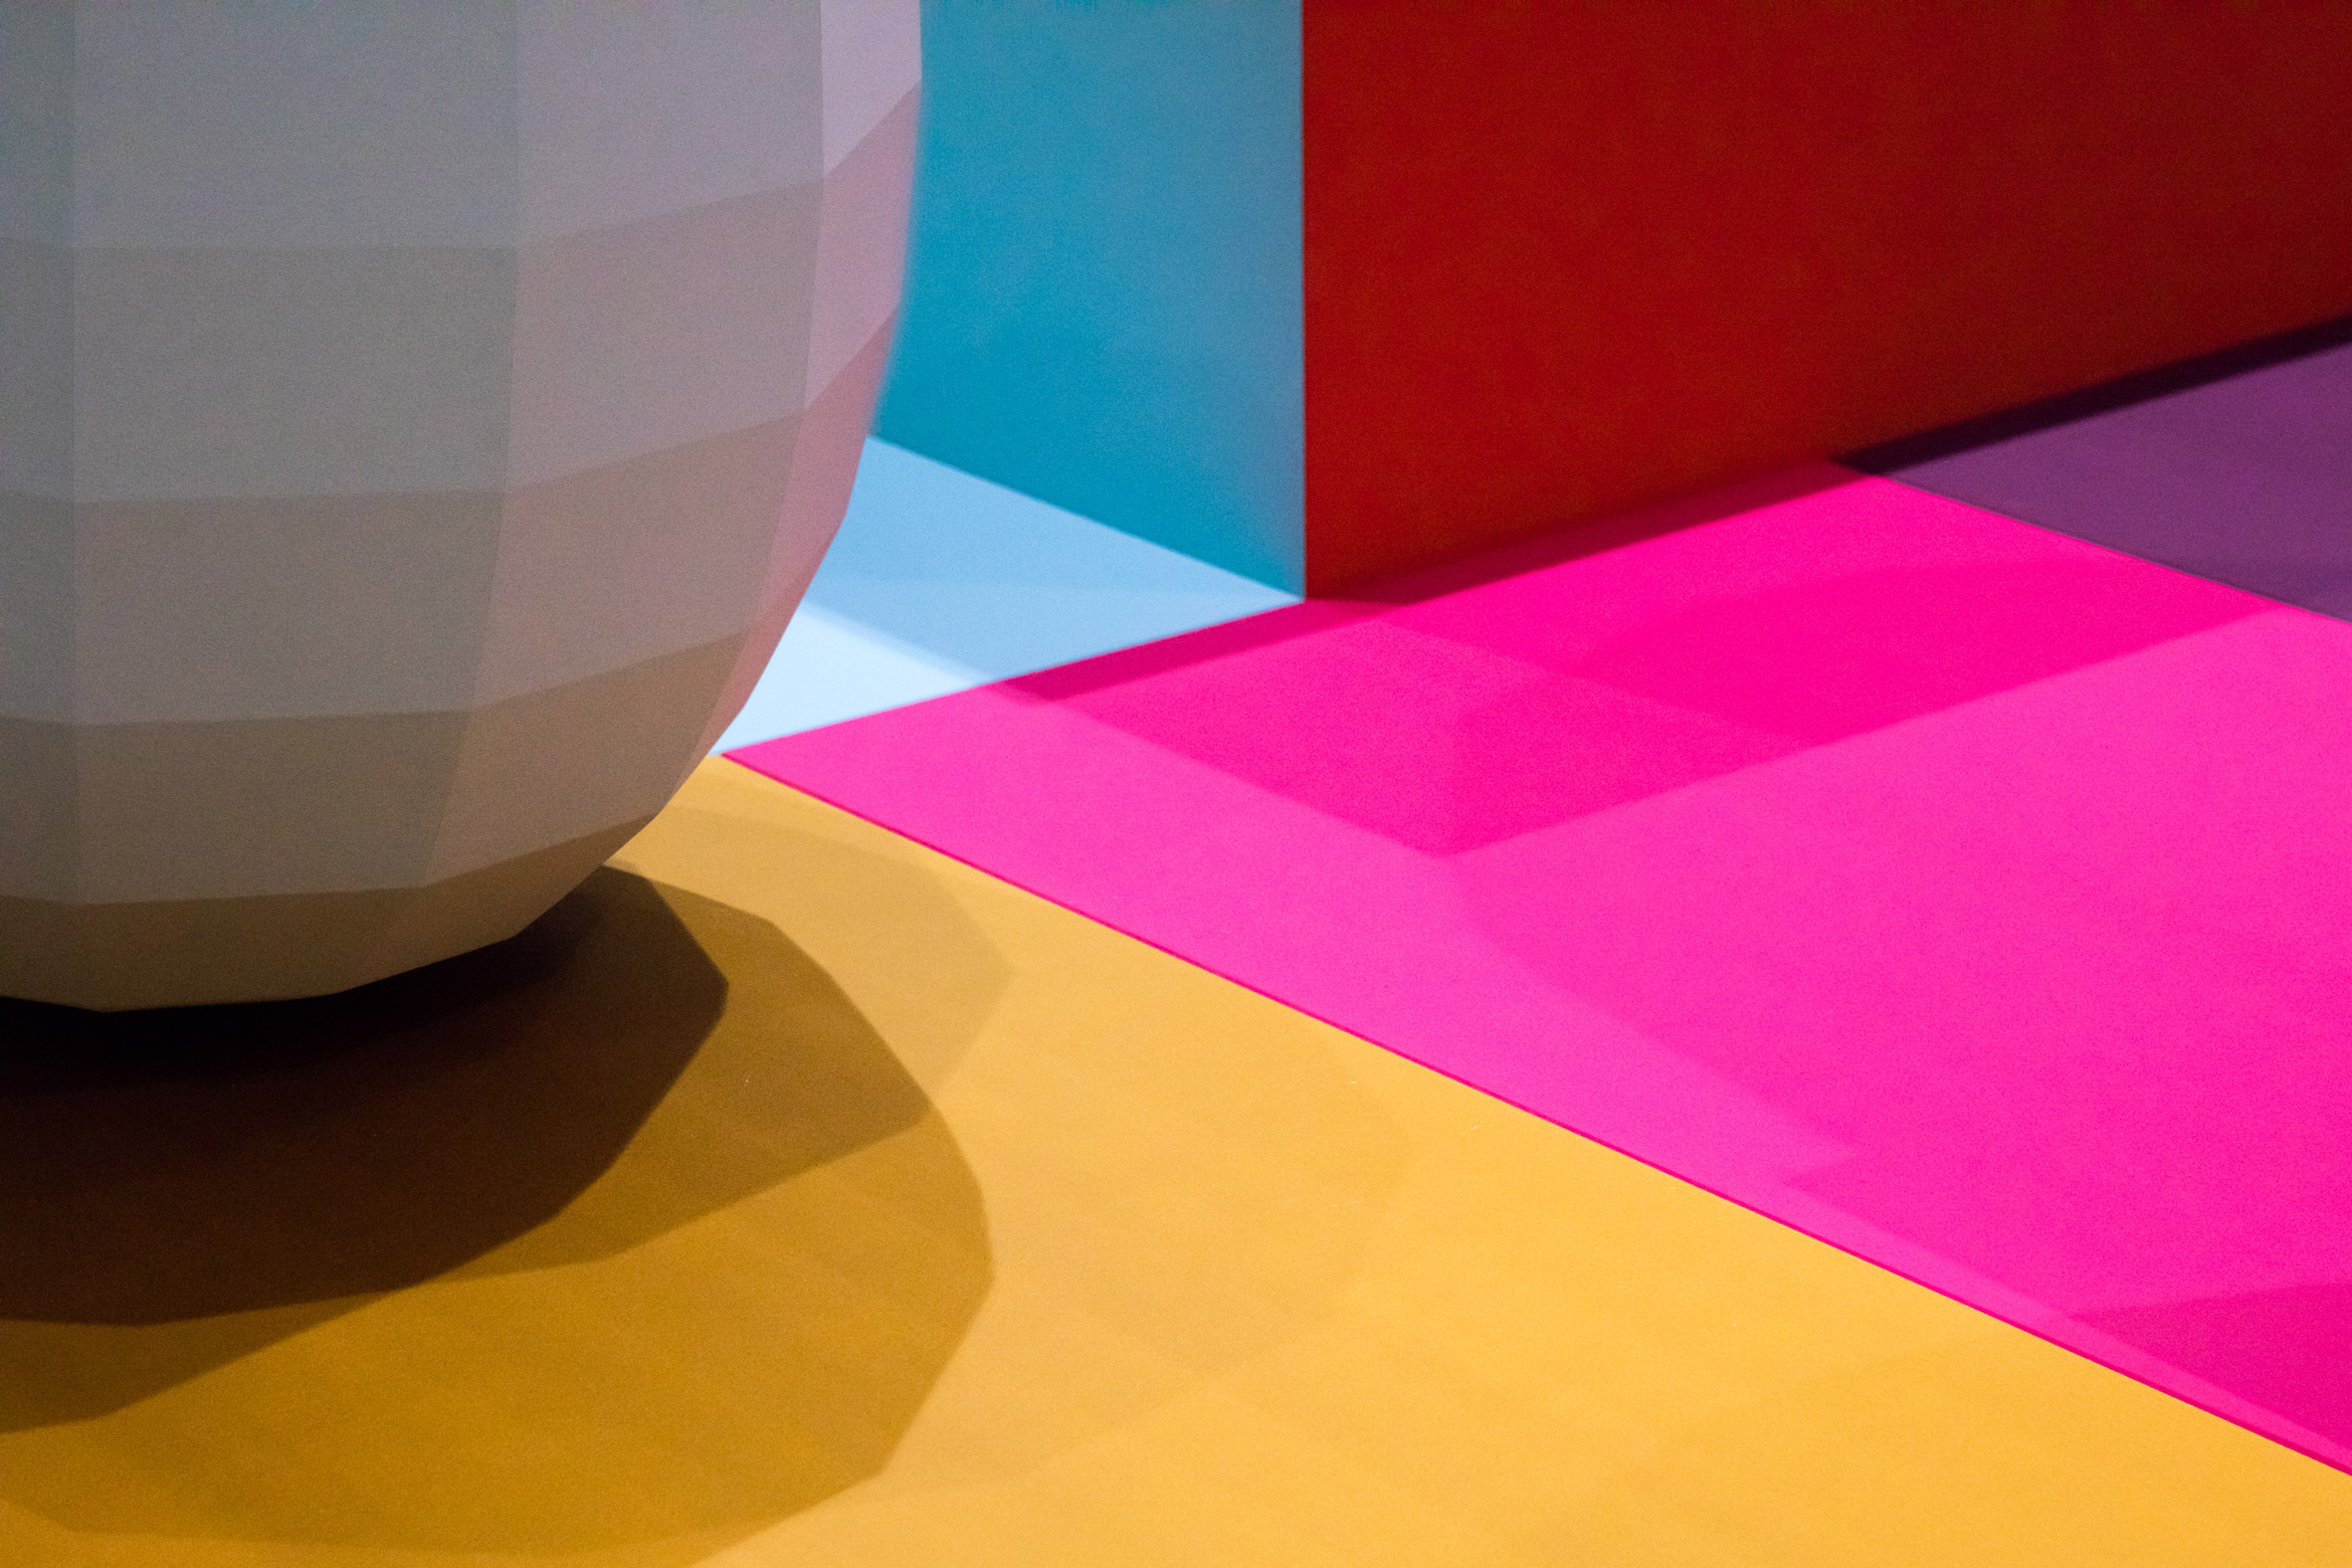 Breathing Colour by Hella Jongerius at the Design Museum